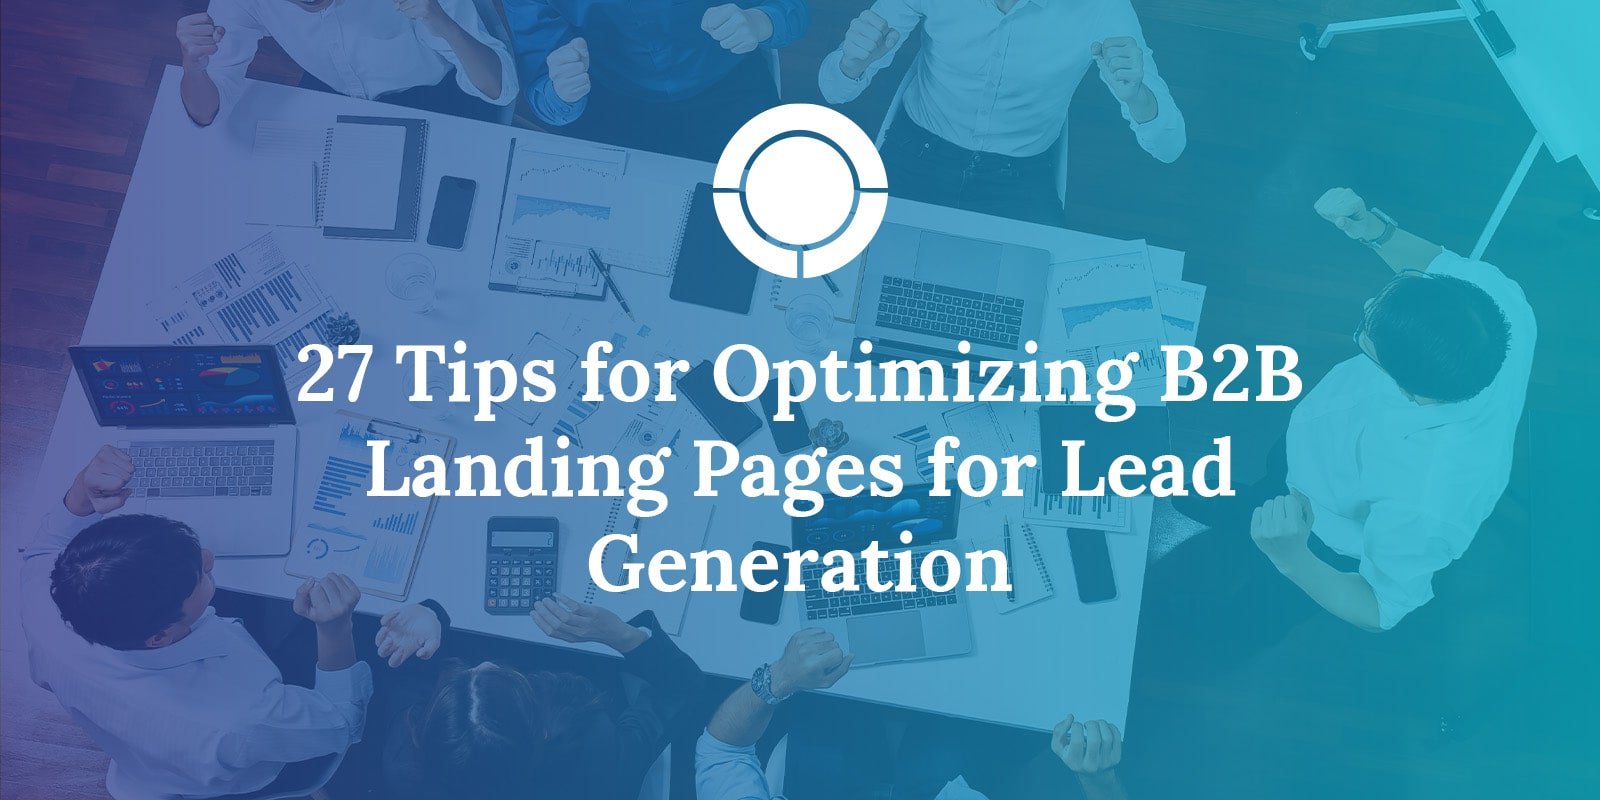 Optimizing B2B Landing Pages for Lead Generation